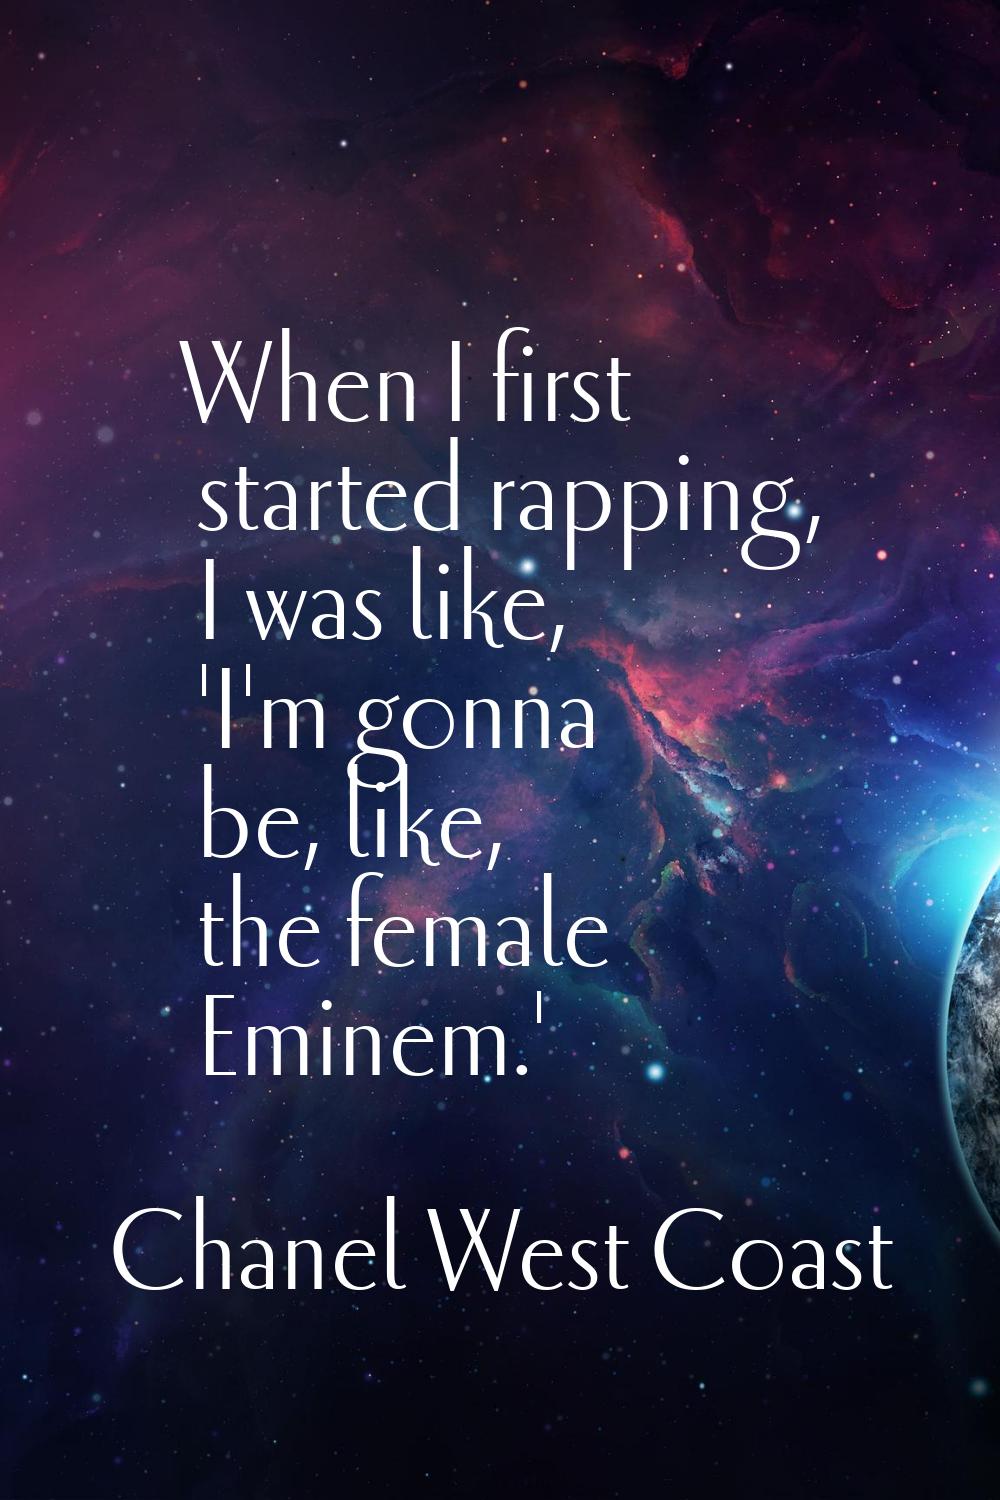 When I first started rapping, I was like, 'I'm gonna be, like, the female Eminem.'